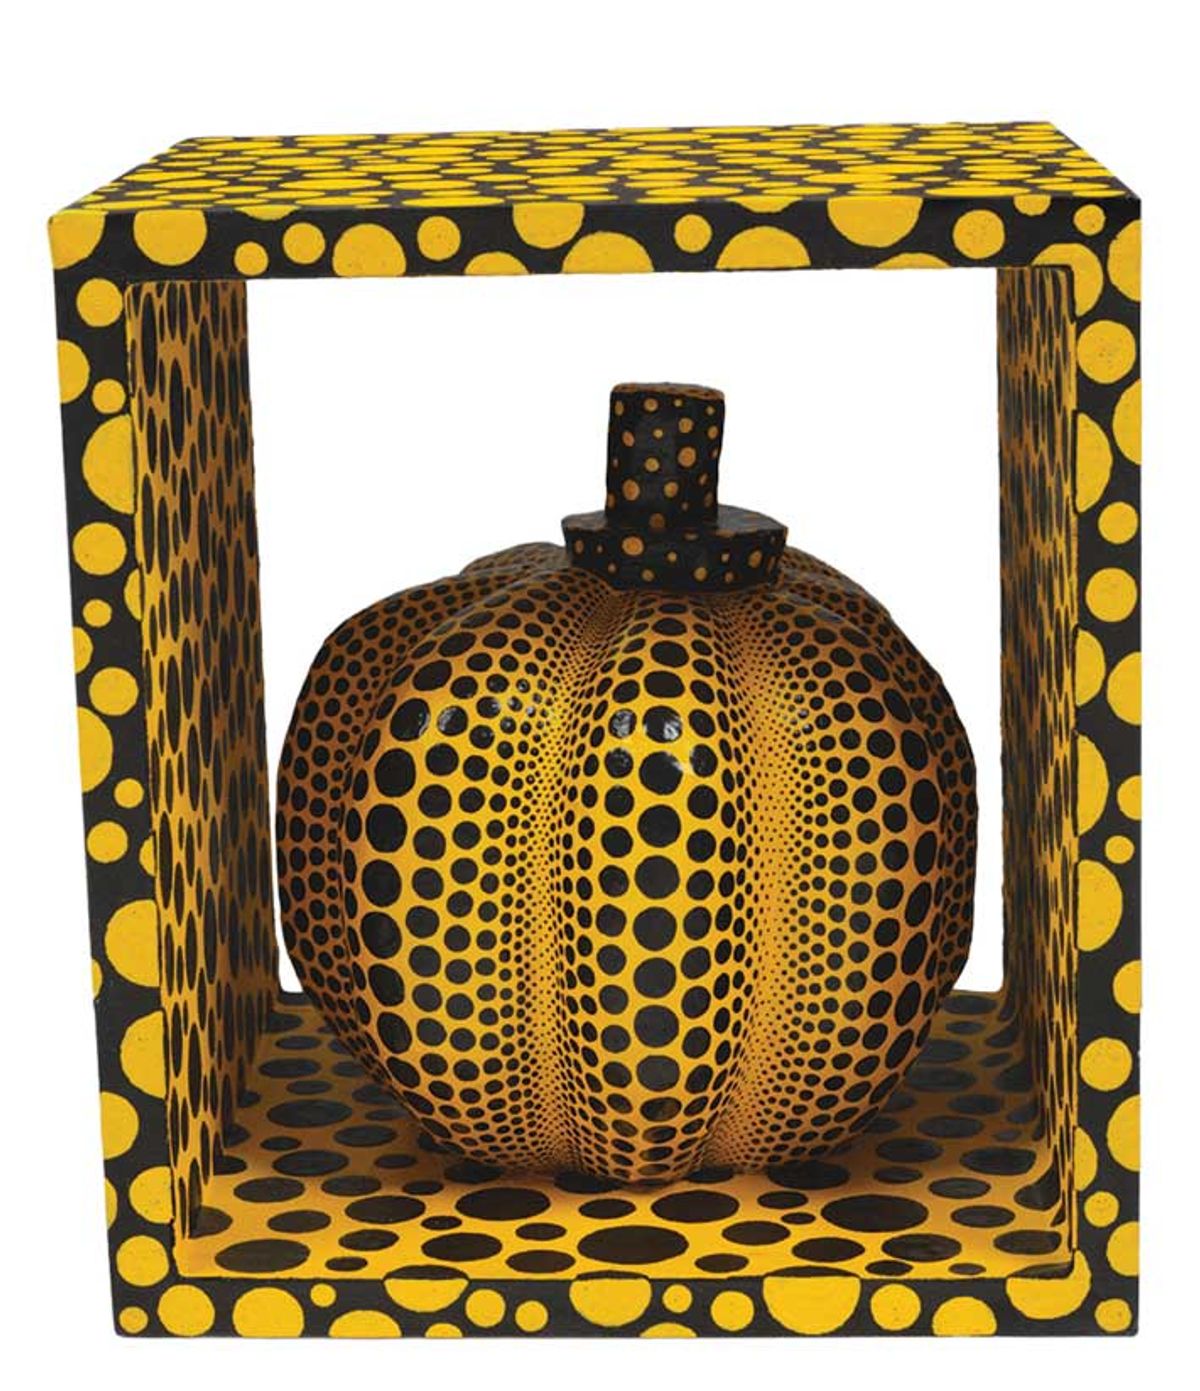 Pumpkin (1999) by Yayoi Kusama, one of more than two dozen artists in Thirty Years: Written with a Splash of Blood at Blum

© the artist. Courtesy Blum Gallery